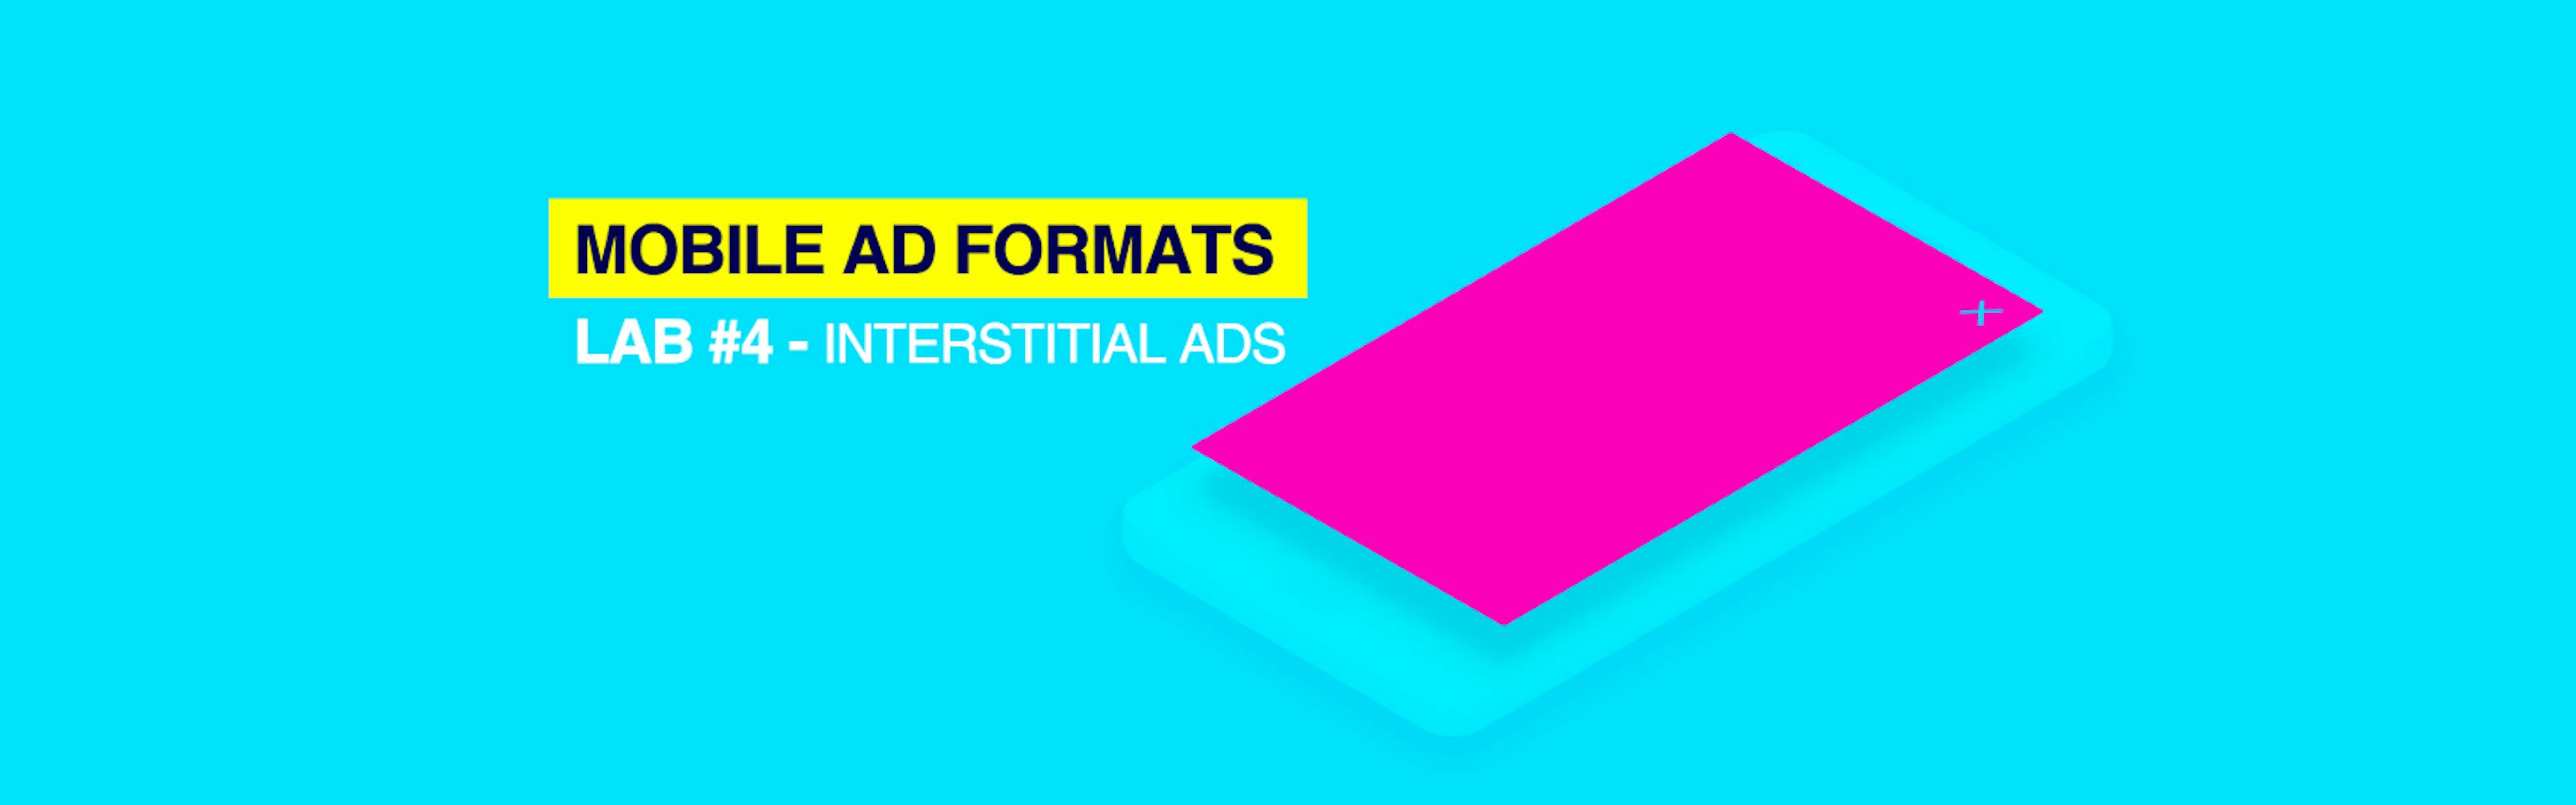 featured image - Mobile Ad Formats Lab #4 — Interstitial Ads